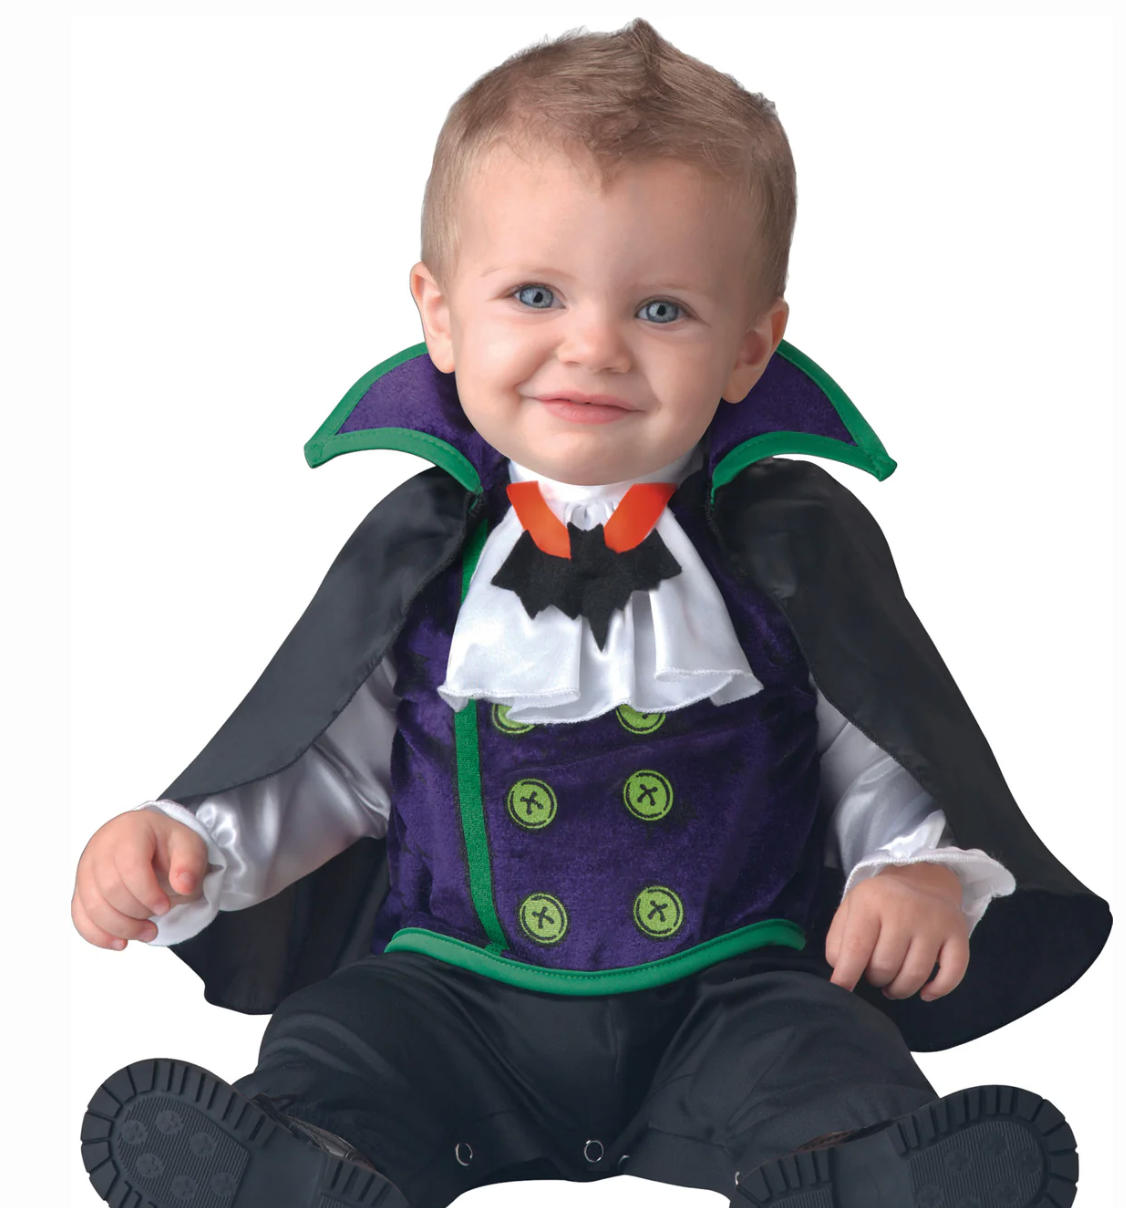 Count Cutie: Creating Enchanting Halloween Moments with Your Little Vampire